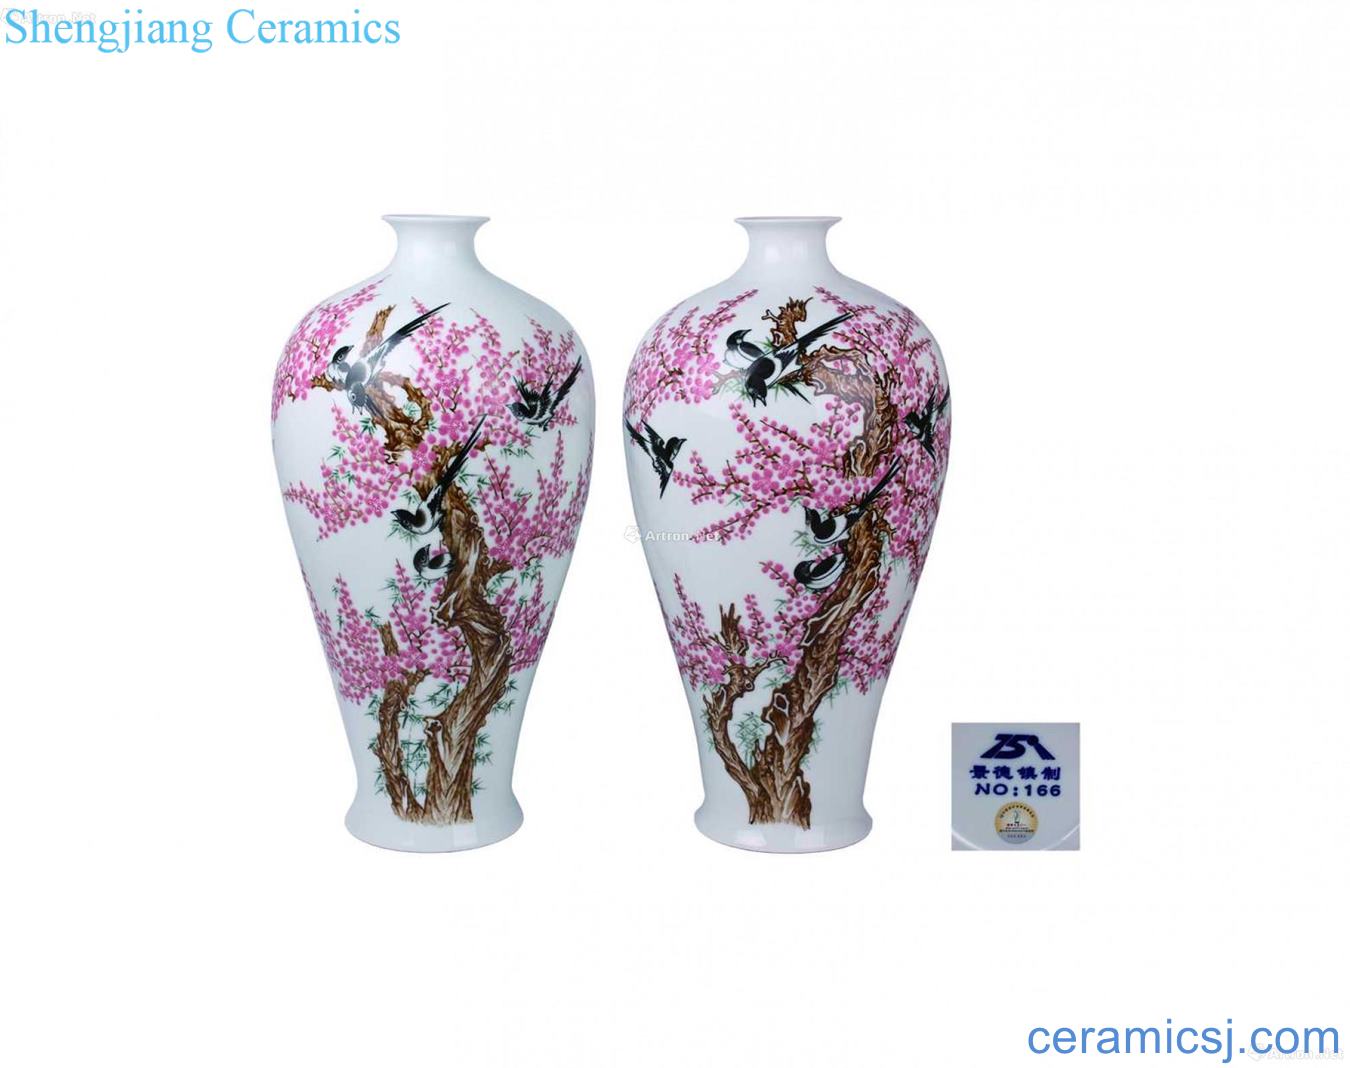 The porcelain monohydrate 750 points peach blossom glair mei bottle